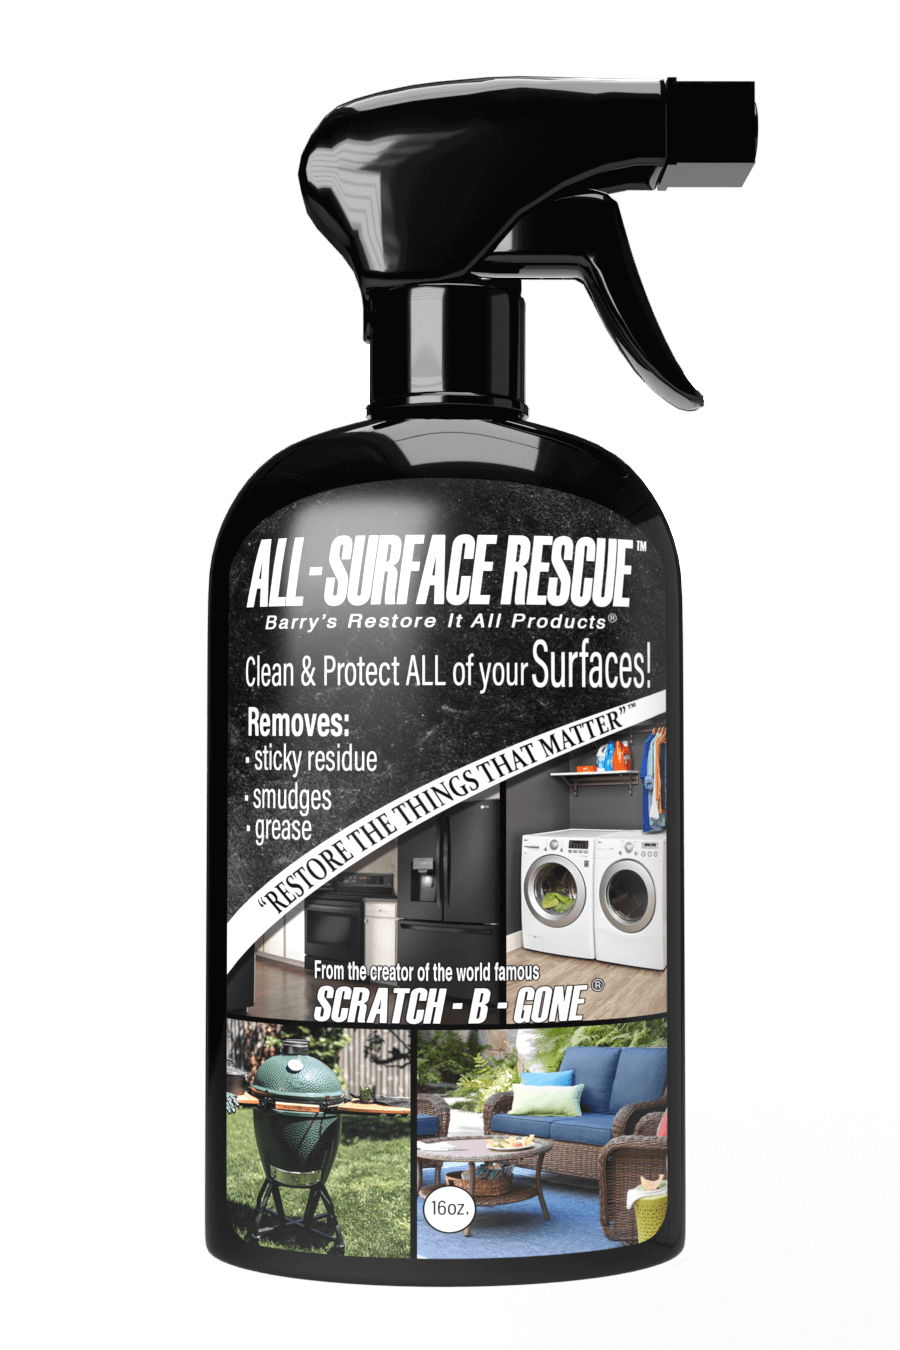 Barry's Restore It All Products All Surface Rescue Spray 16oz - white background